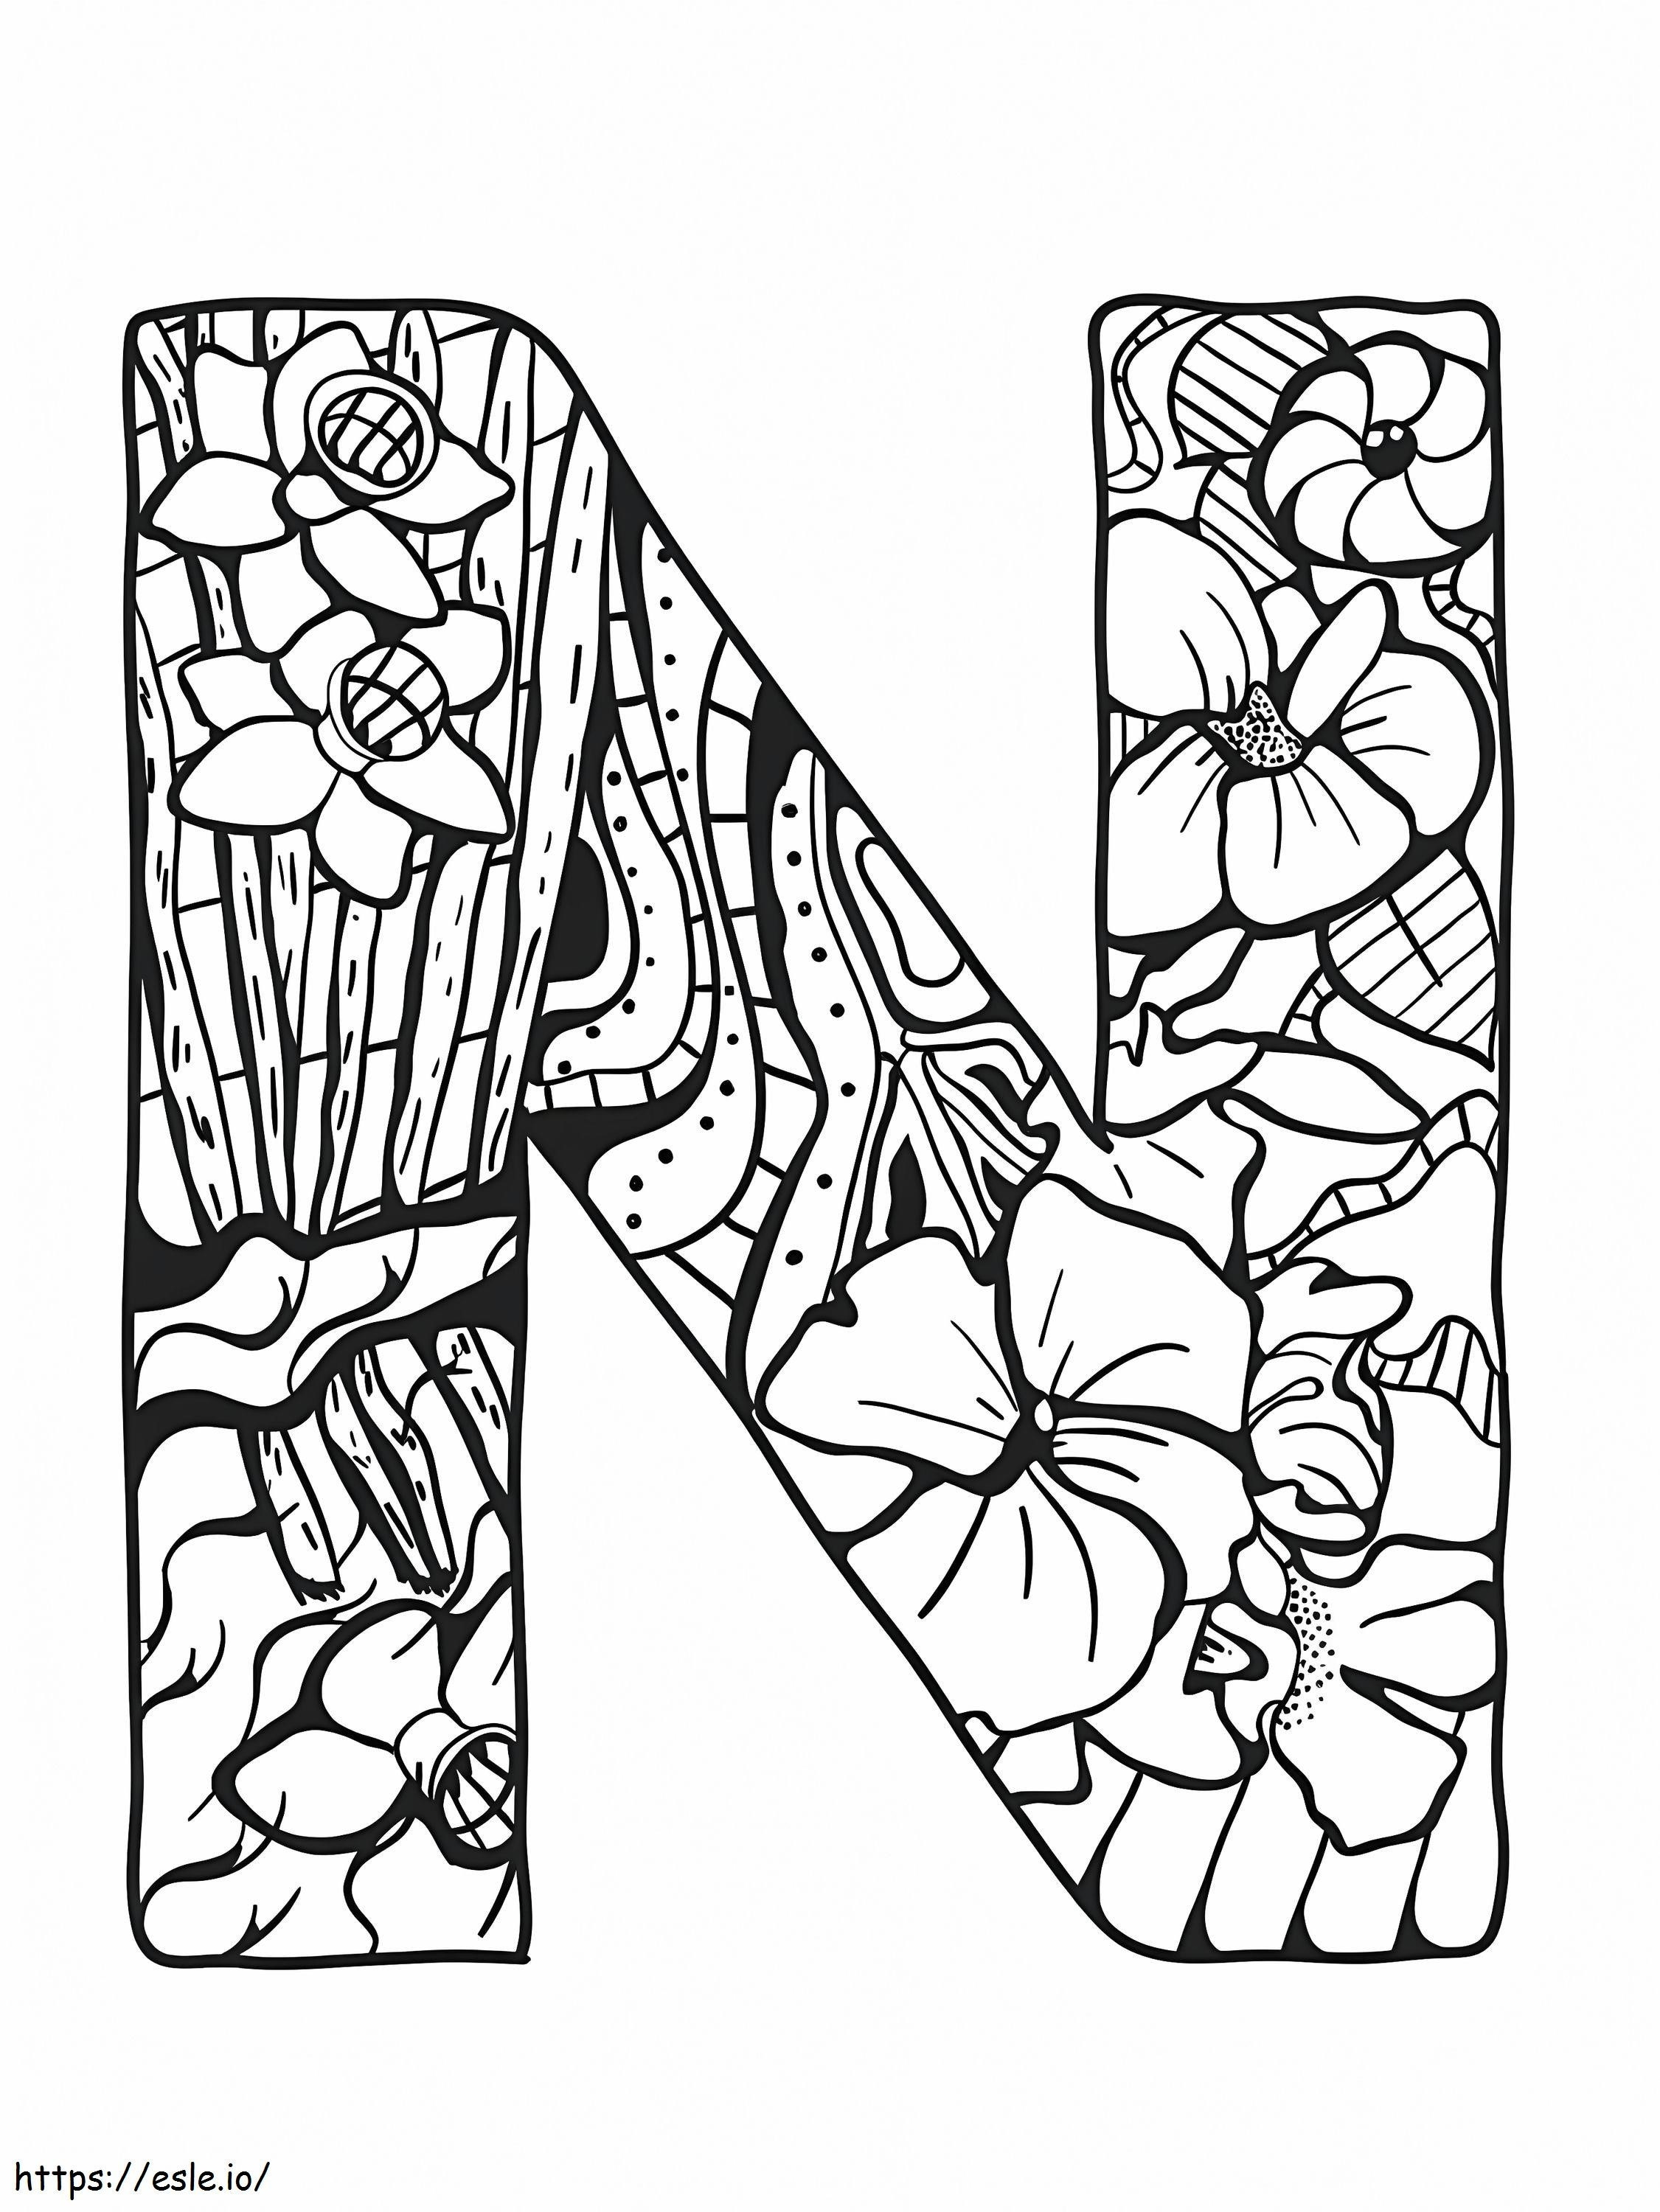 Letter N 5 coloring page